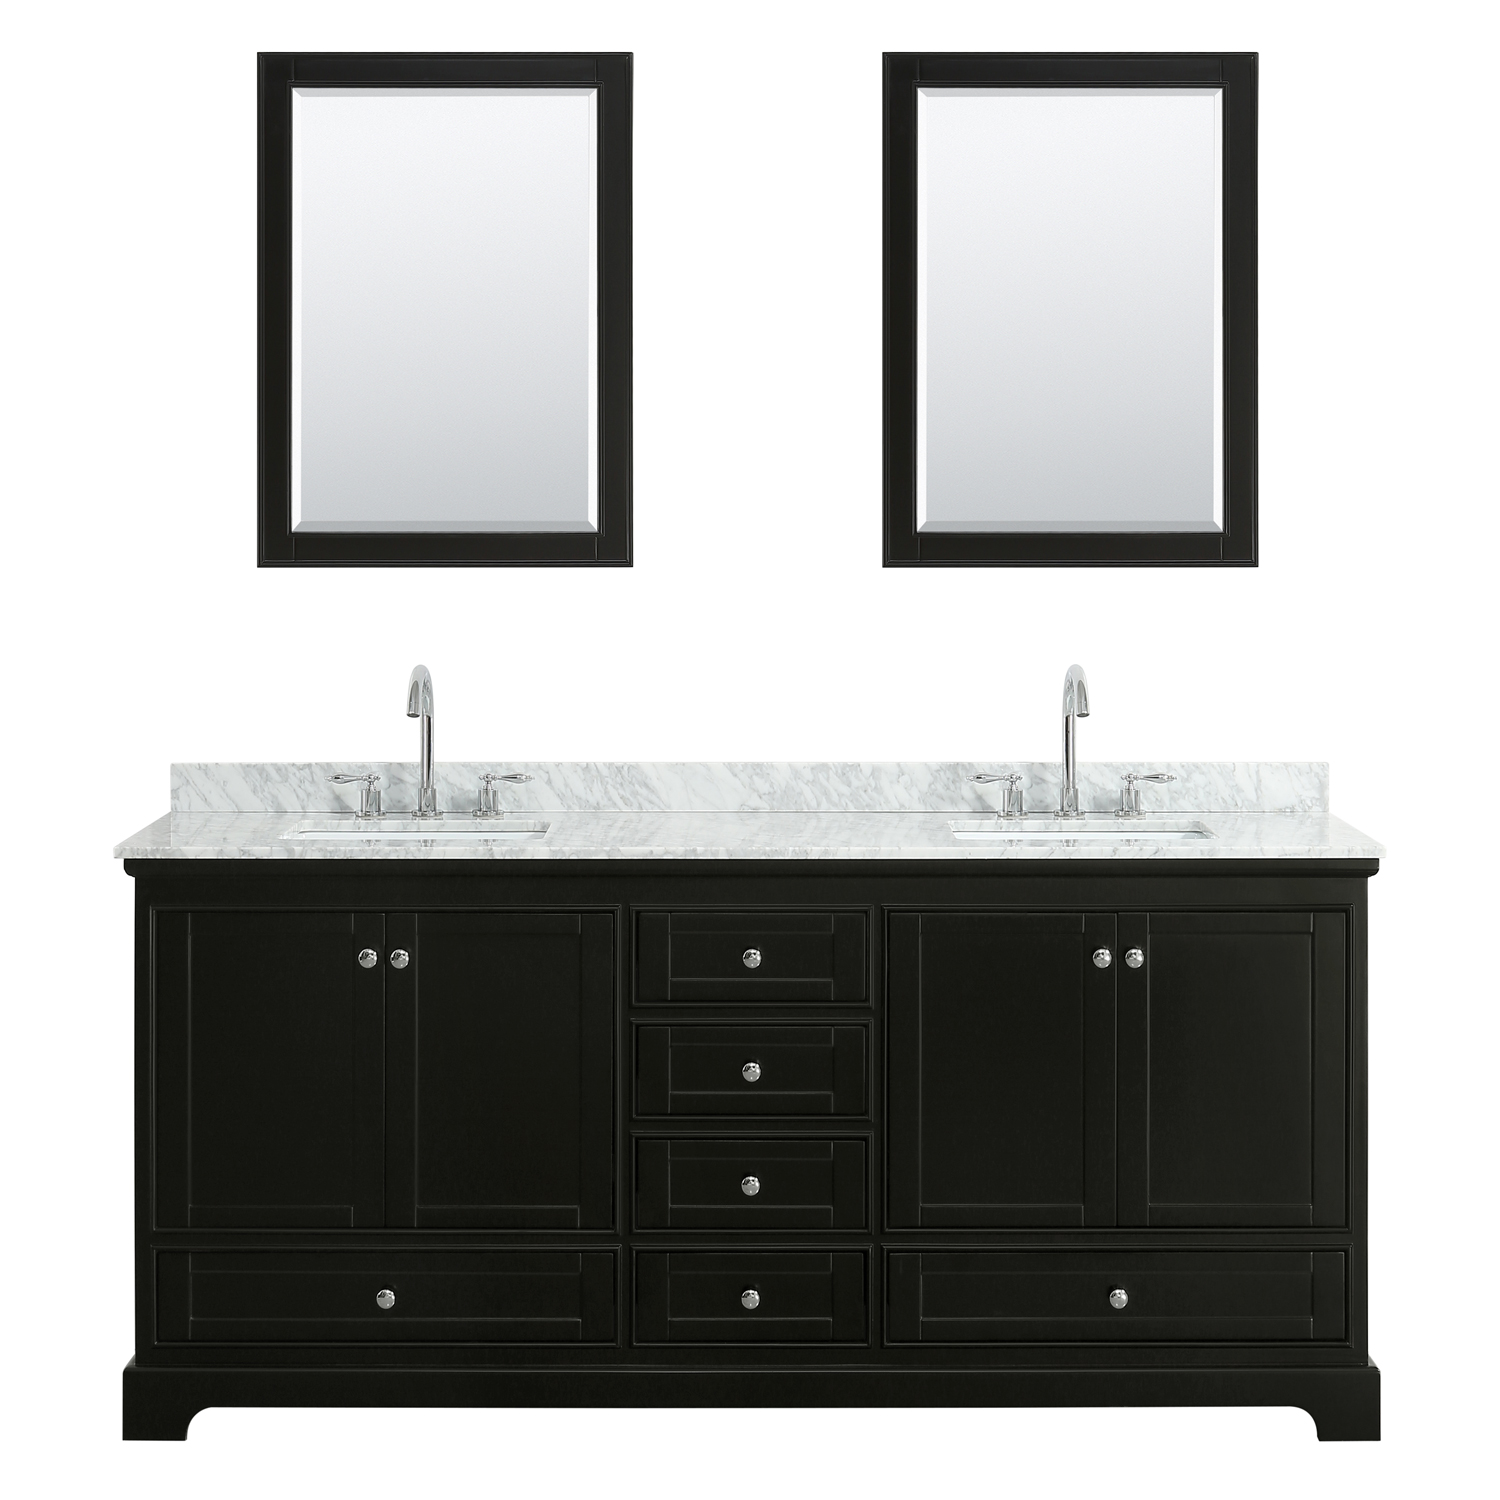 80" Double Bathroom Vanity in White Carrara Marble Countertop with Undermount Porcelain Sinks, Medicine Cabinet, Mirror and Color Options